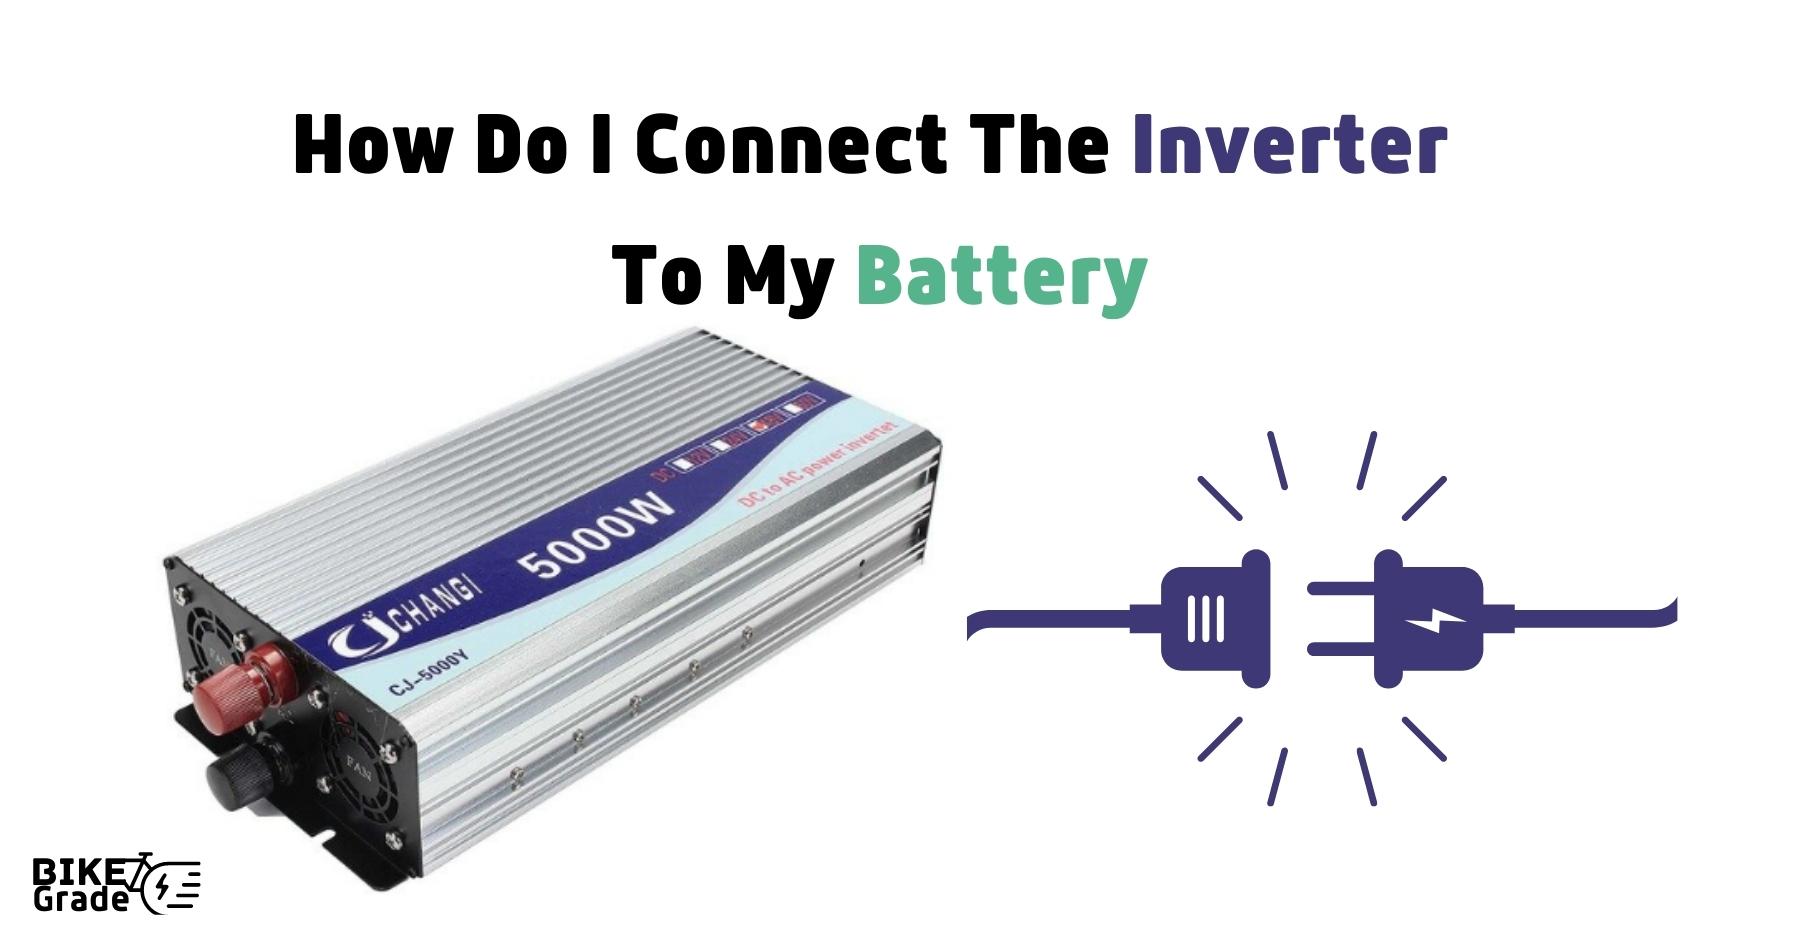 How Do I Connect The Inverter To My Battery